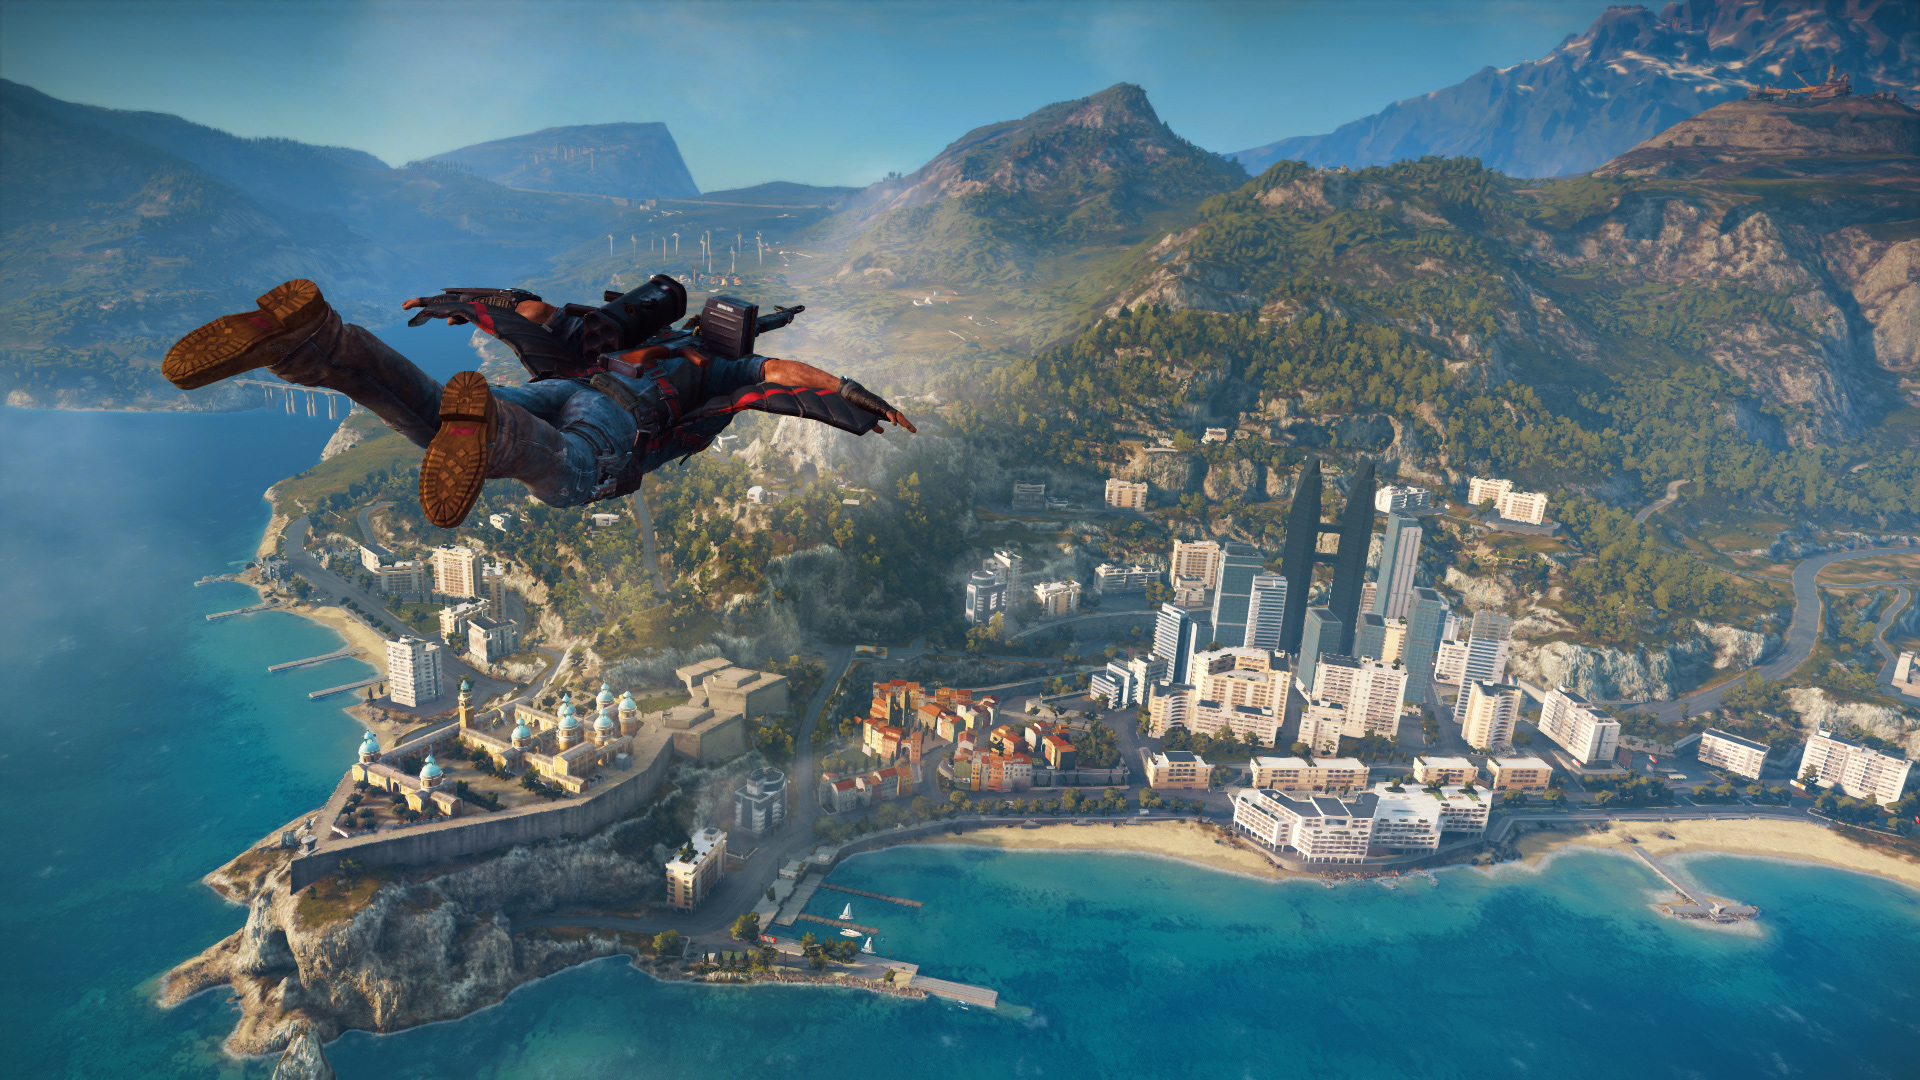 Only 3 games. Just cause 3. Игра just cause 3. Ди Равелло. Just cause 3 провинция Либеккио.